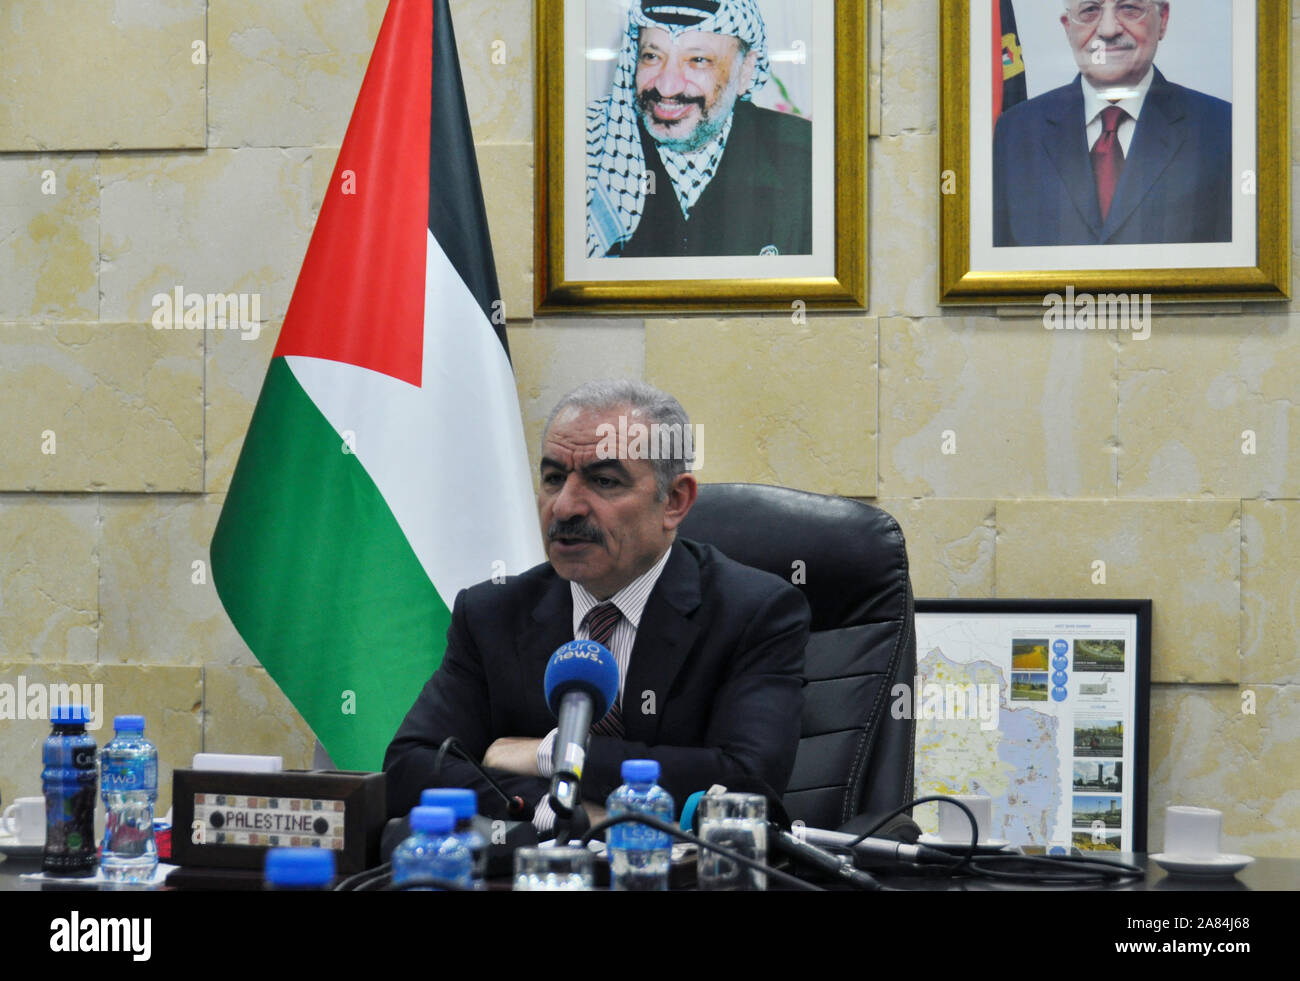 Ramallah, Palestinian Territory, Occupied. 29th Oct, 2019. Prime Minister of Palestine Mohammad Shtayyeh speaks with journalists during the press conference in Ramallah, Palestine, October 29, 2019. Credit: Eliska Naegele/CTK Photo/Alamy Live News Stock Photo